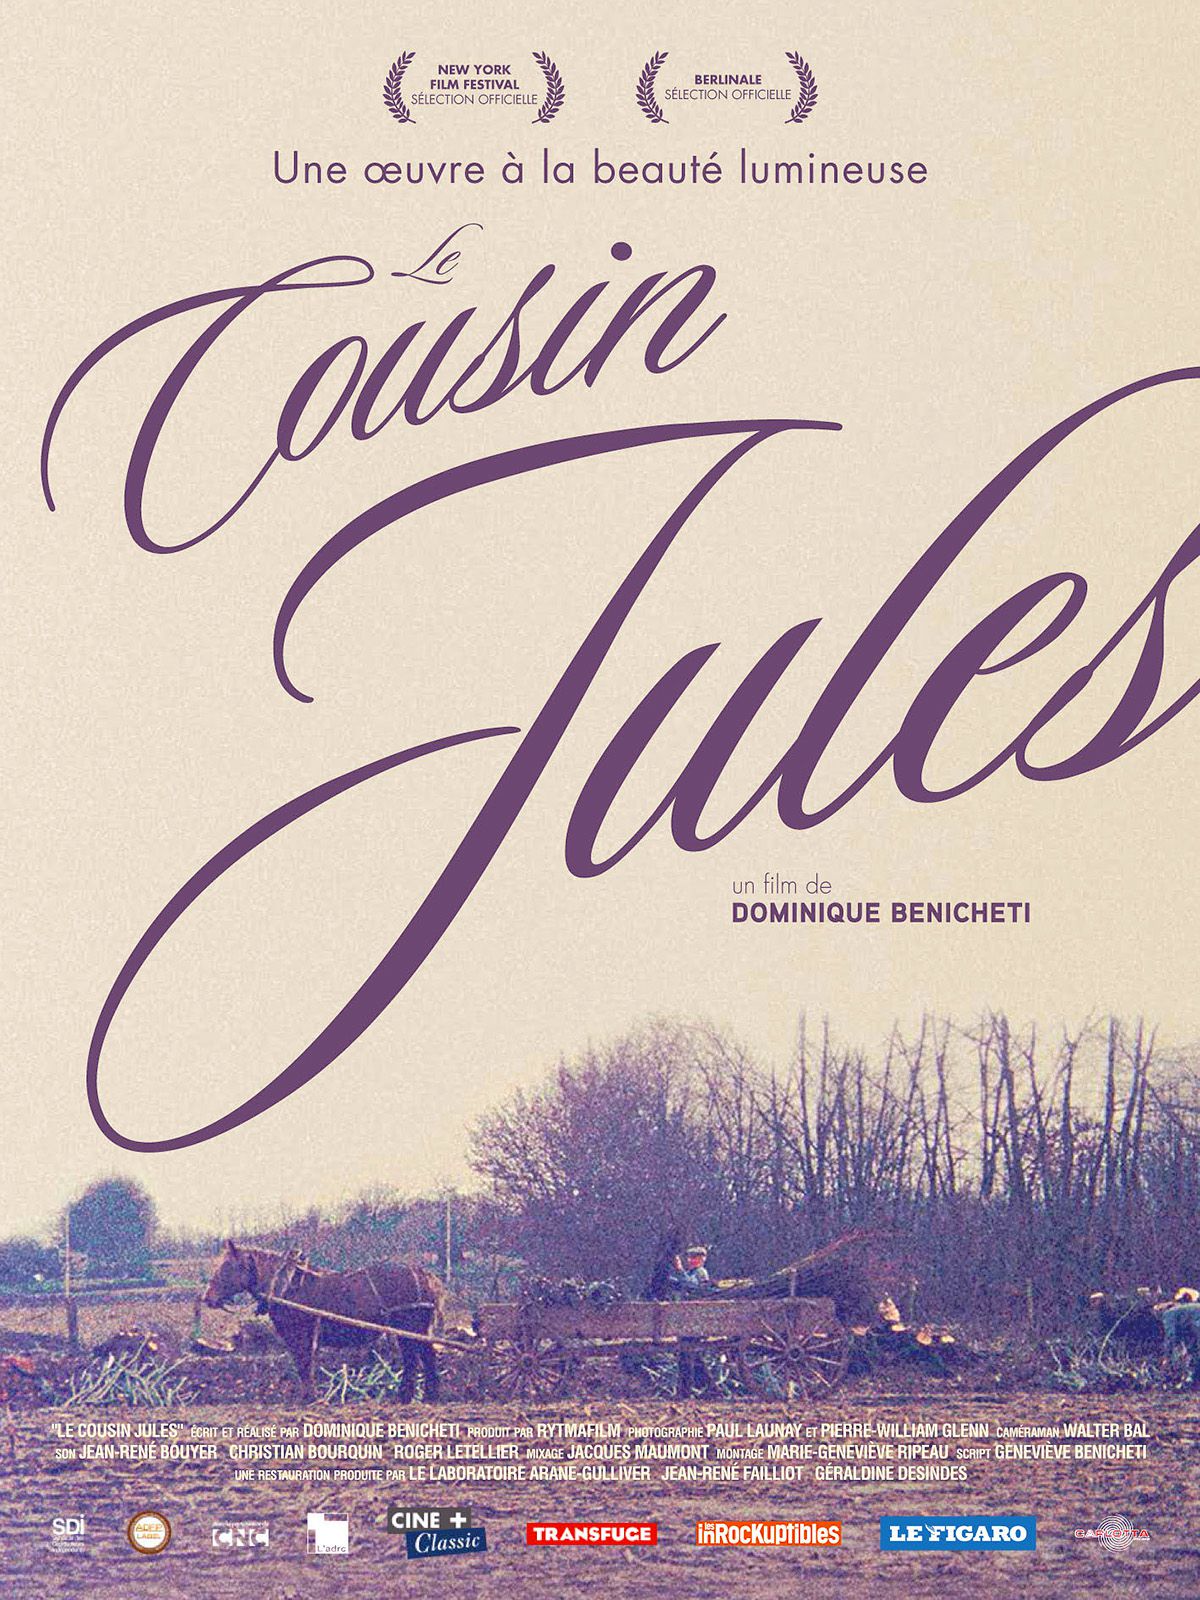 Le Cousin Jules - Documentaire (1968) streaming VF gratuit complet